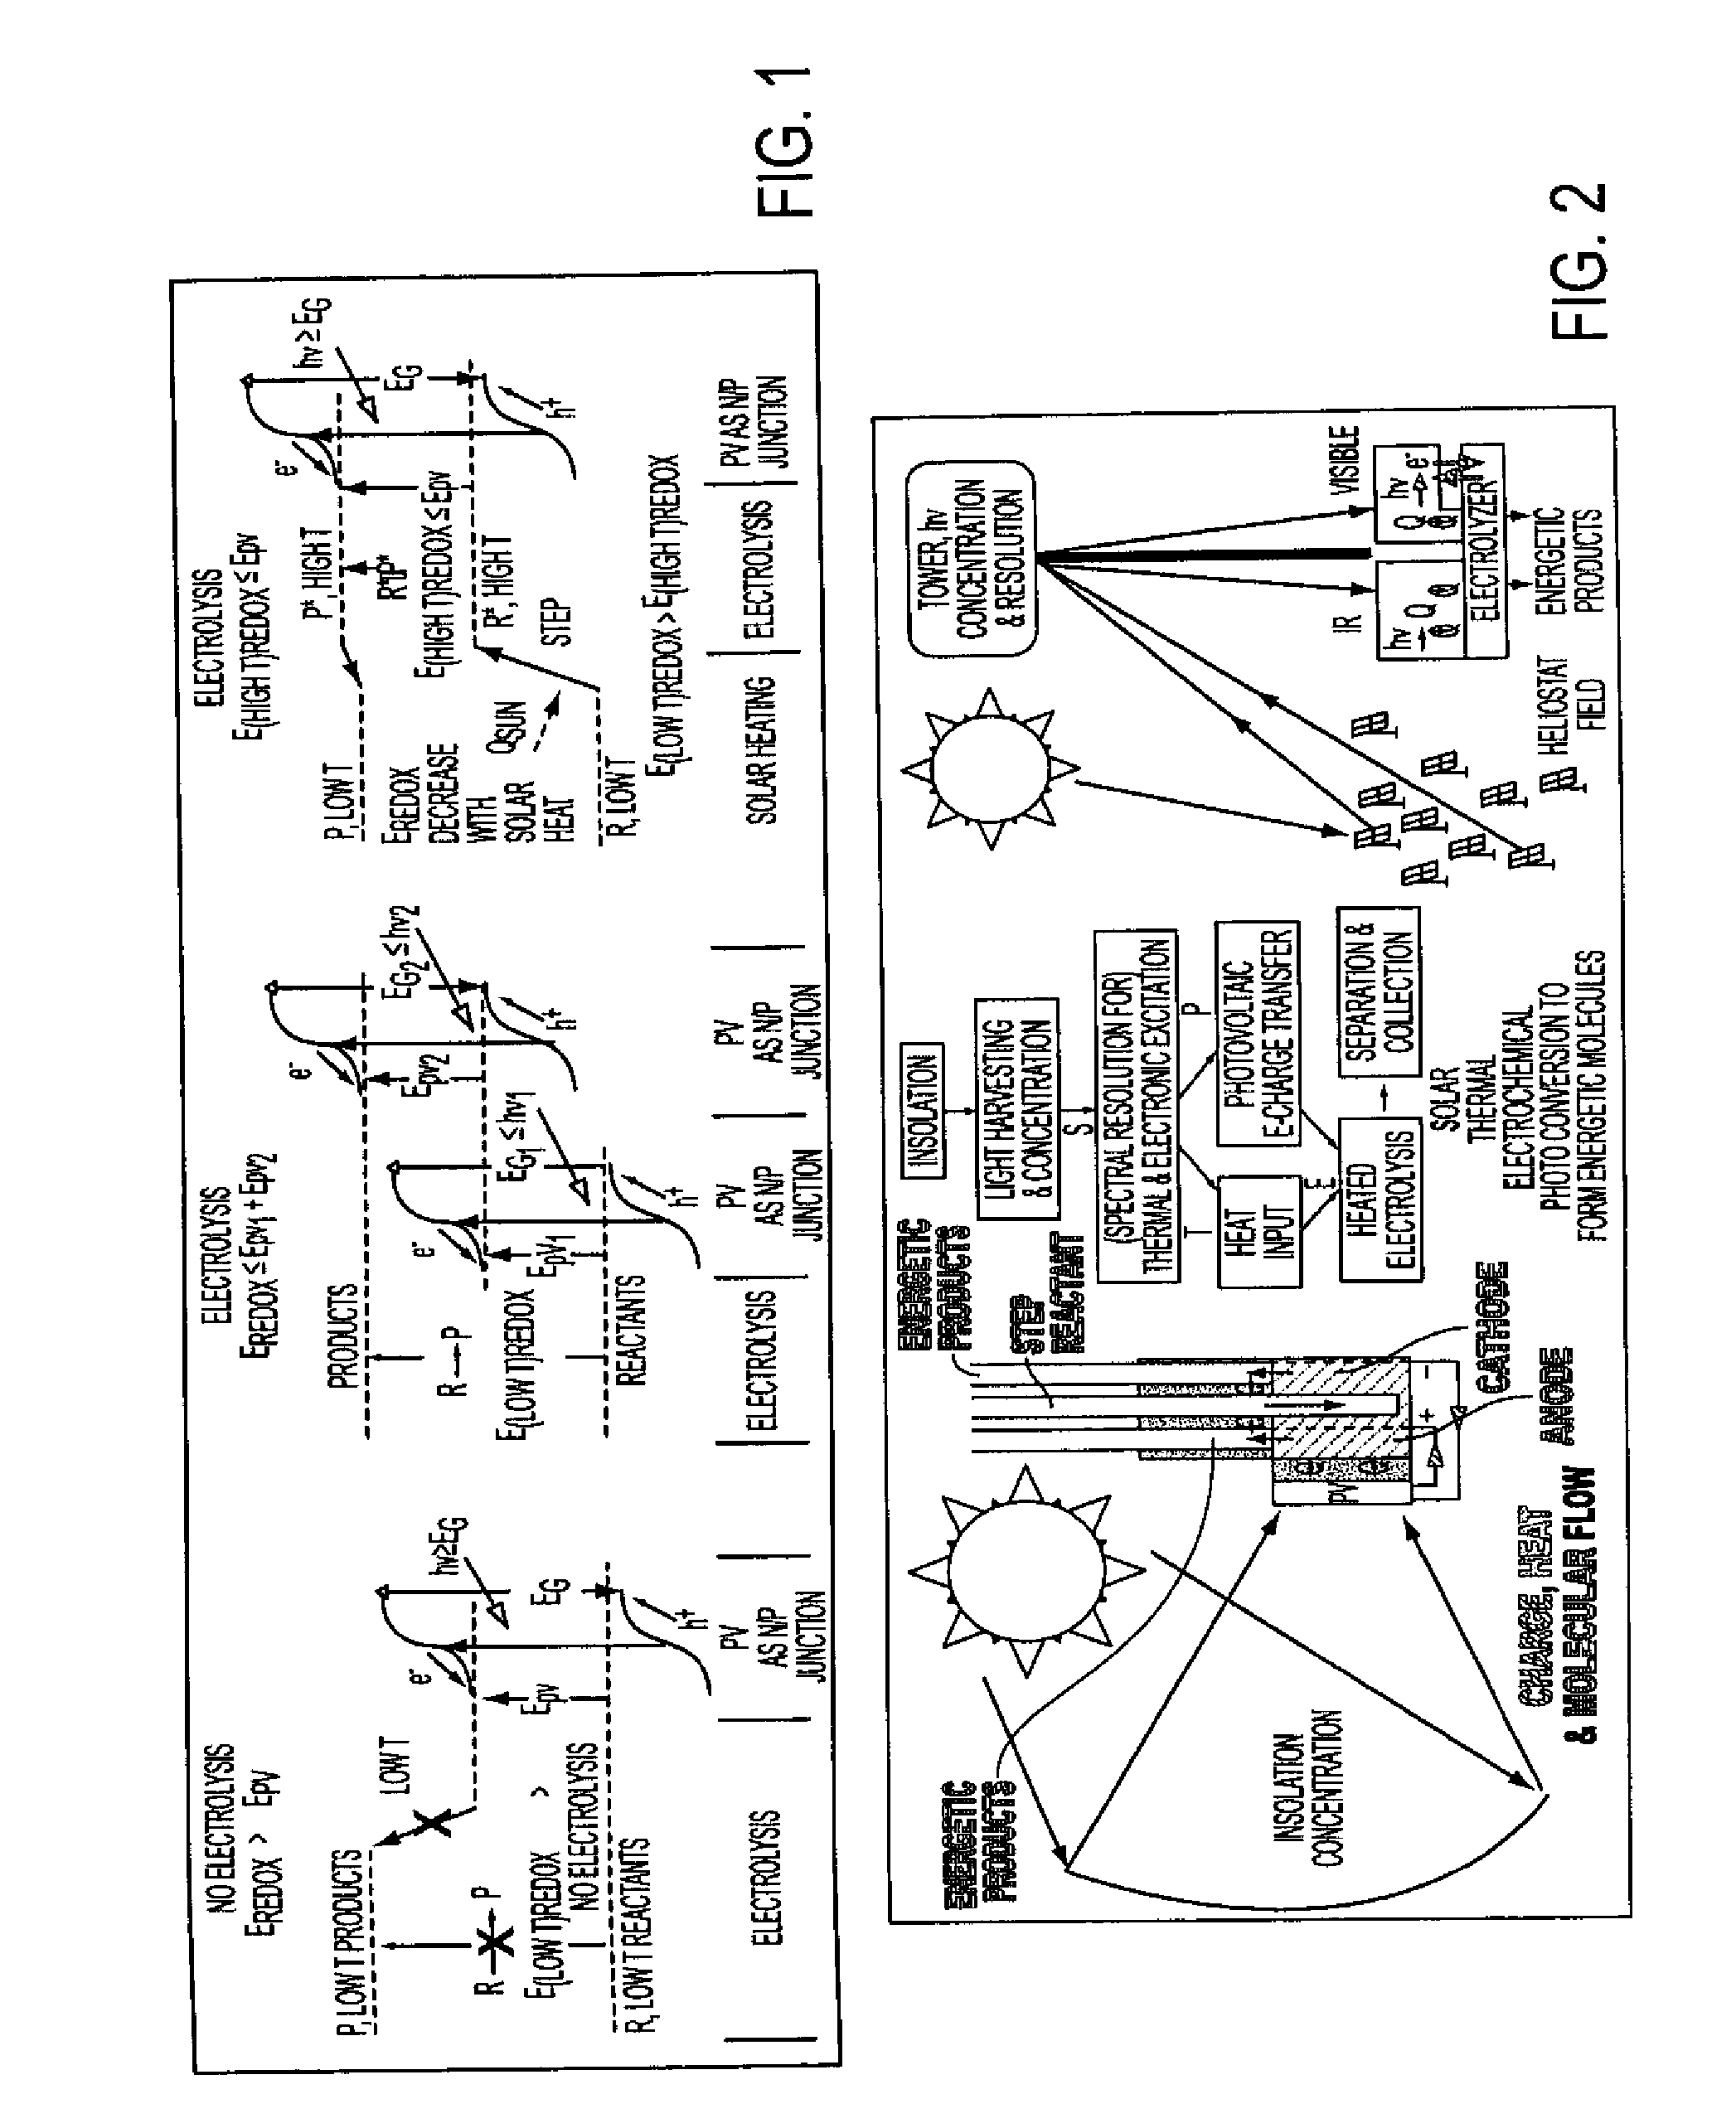 Process for electrosynthesis of energetic molecules